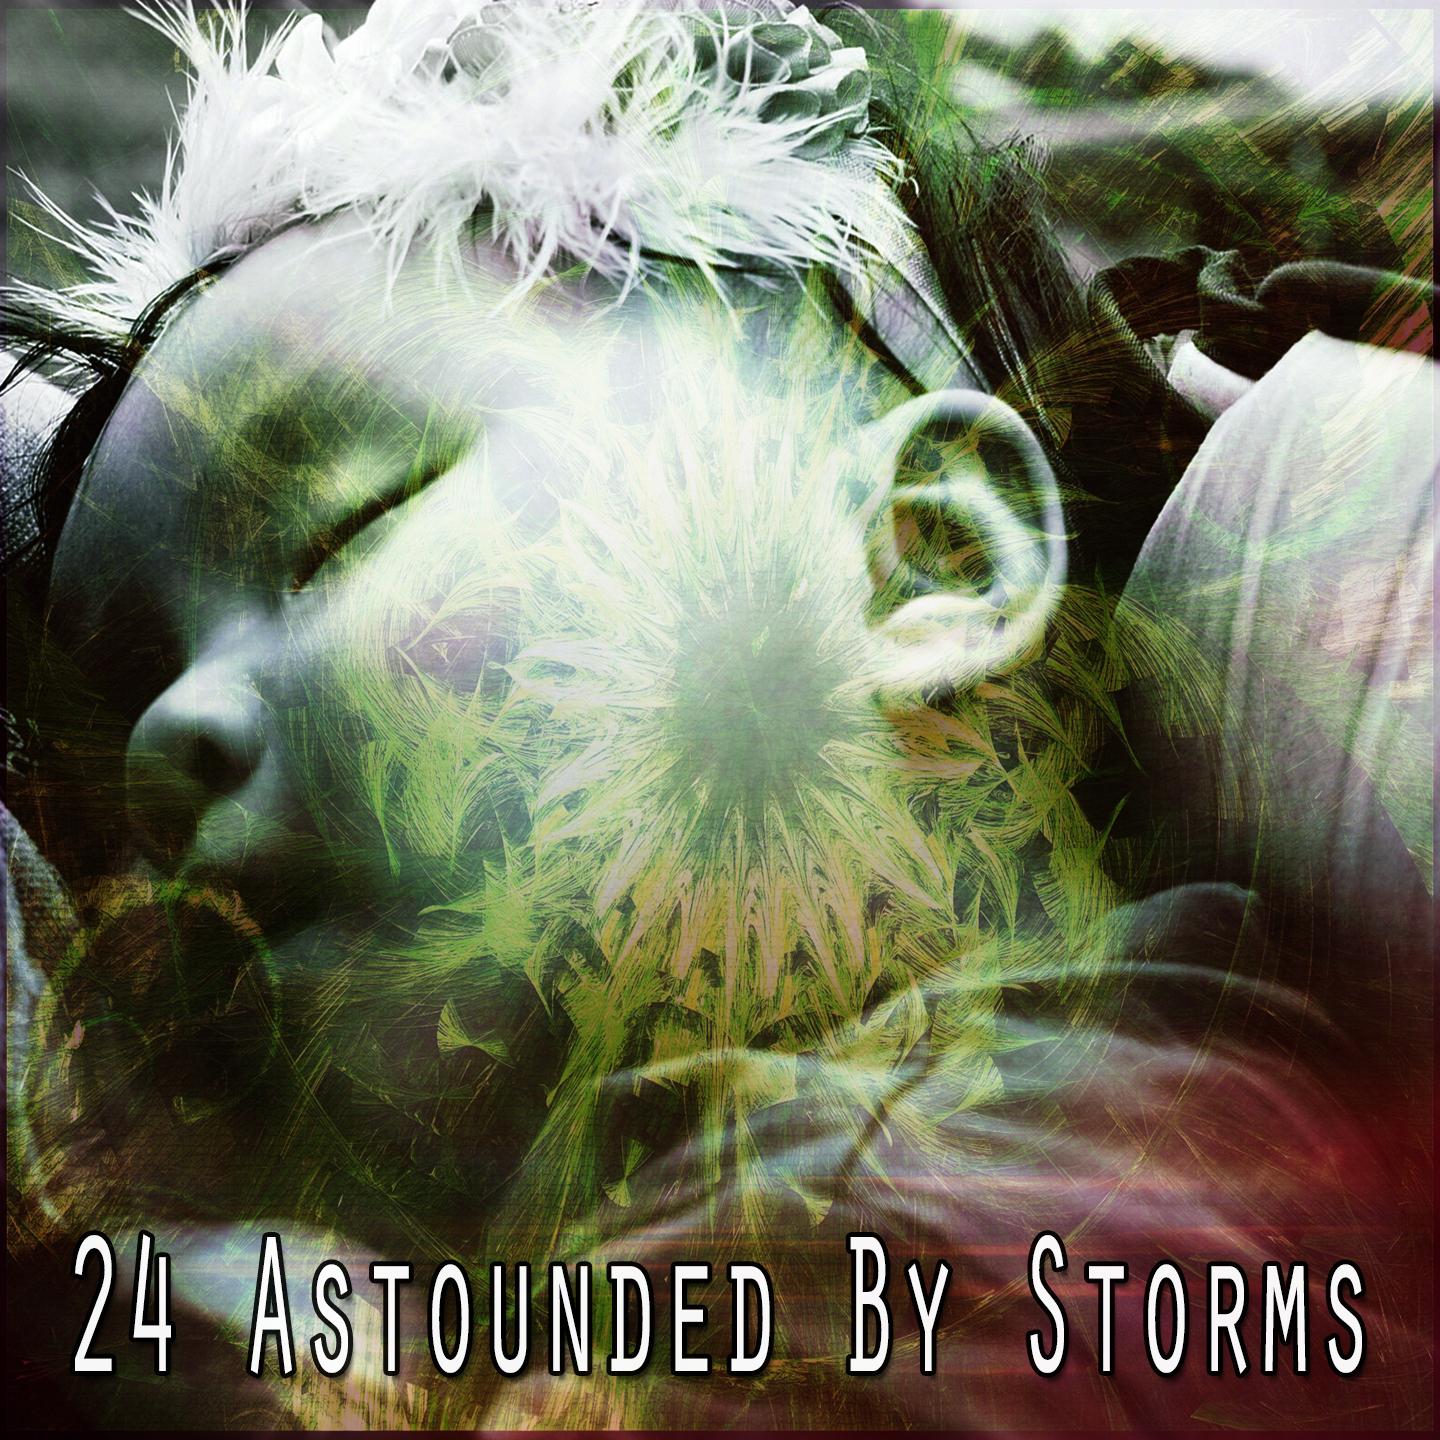 24 Astounded by Storms